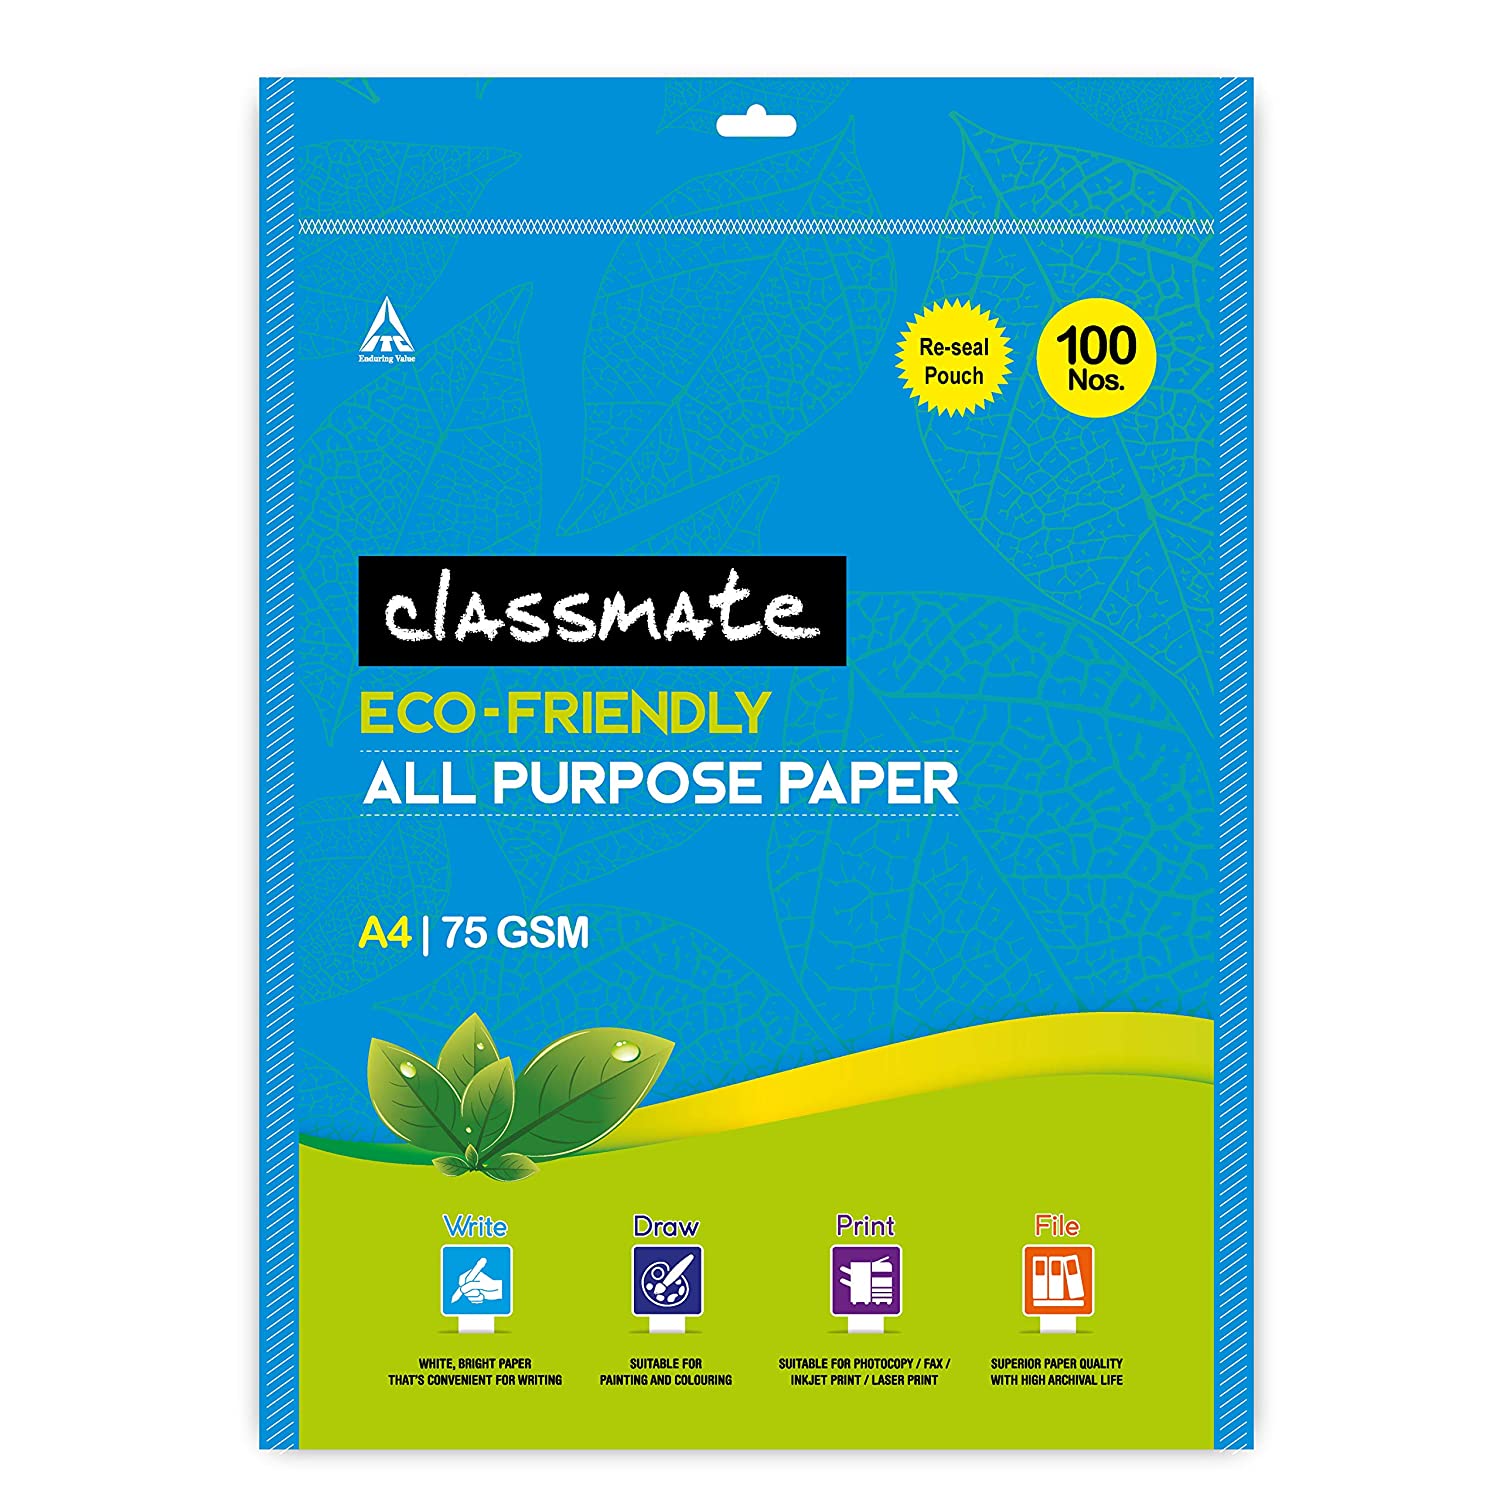 Classmate A4 Size all purpose paper - White, Unruled, Pack of 100